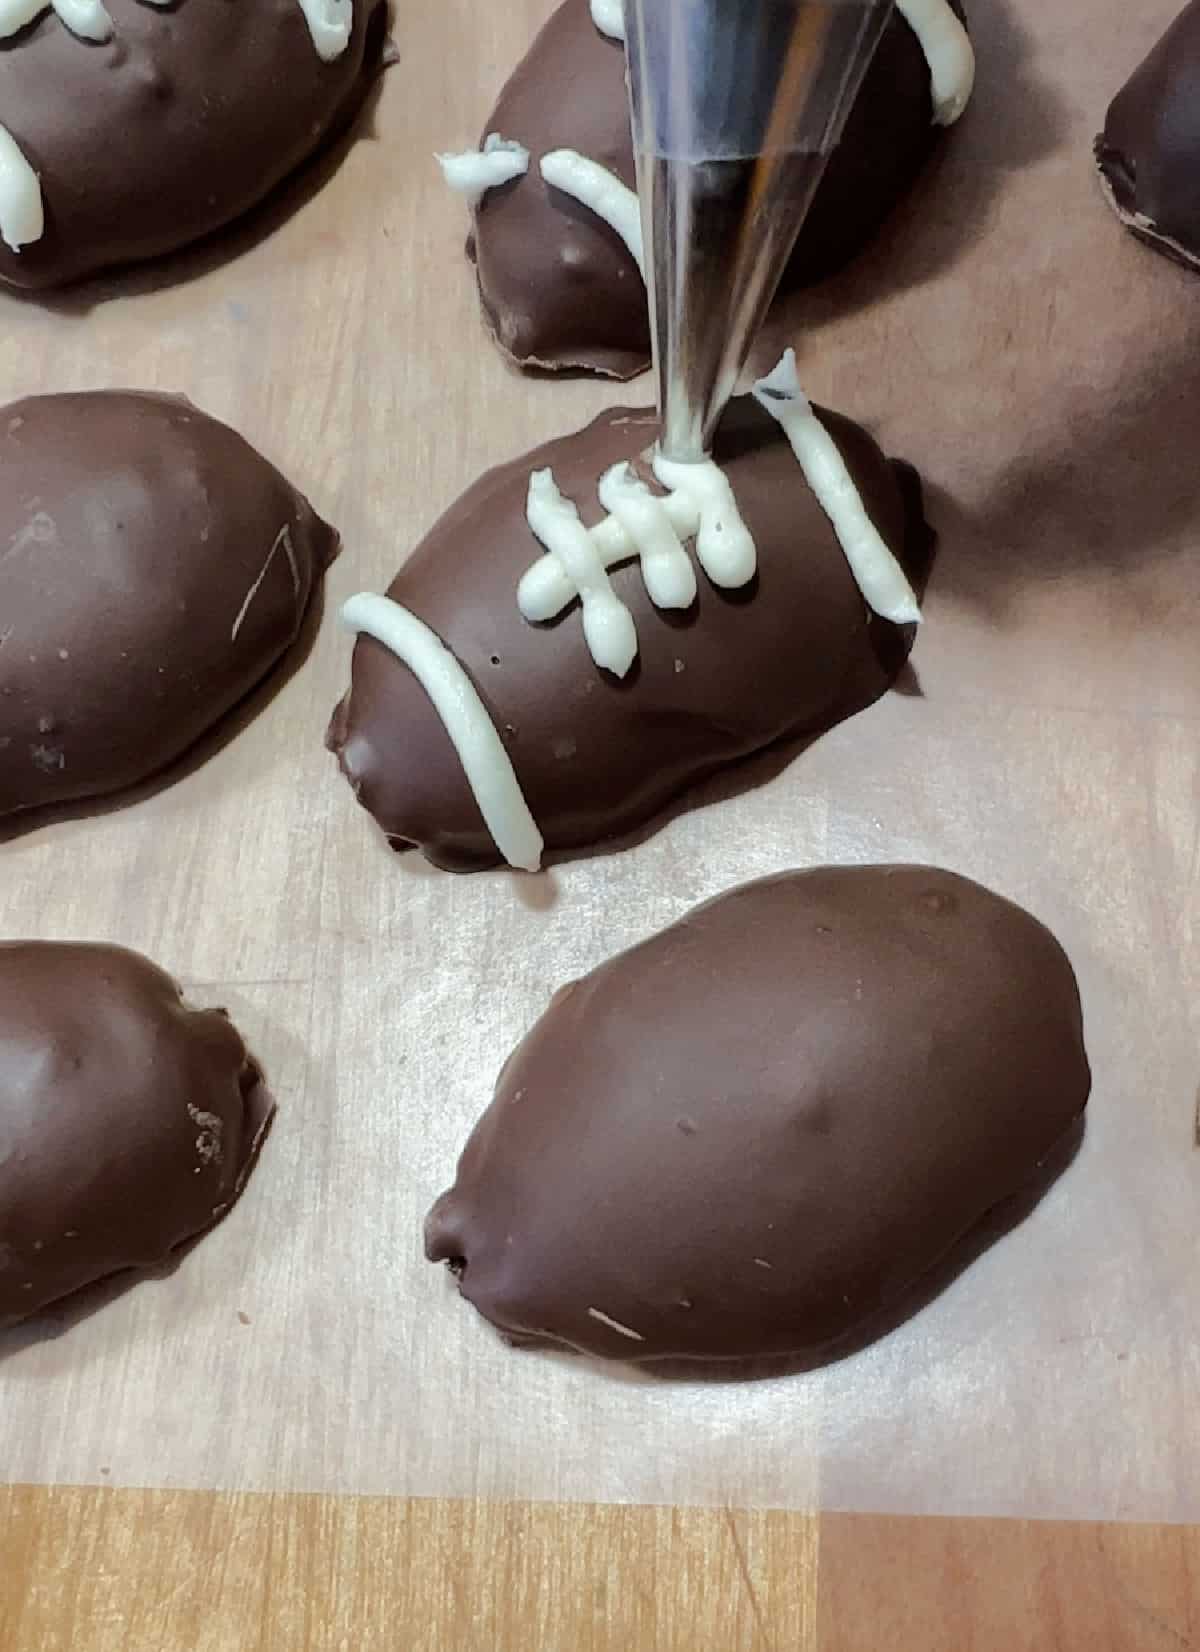 piping white frosting onto the football Oreo truffle to resemble markings on a football.